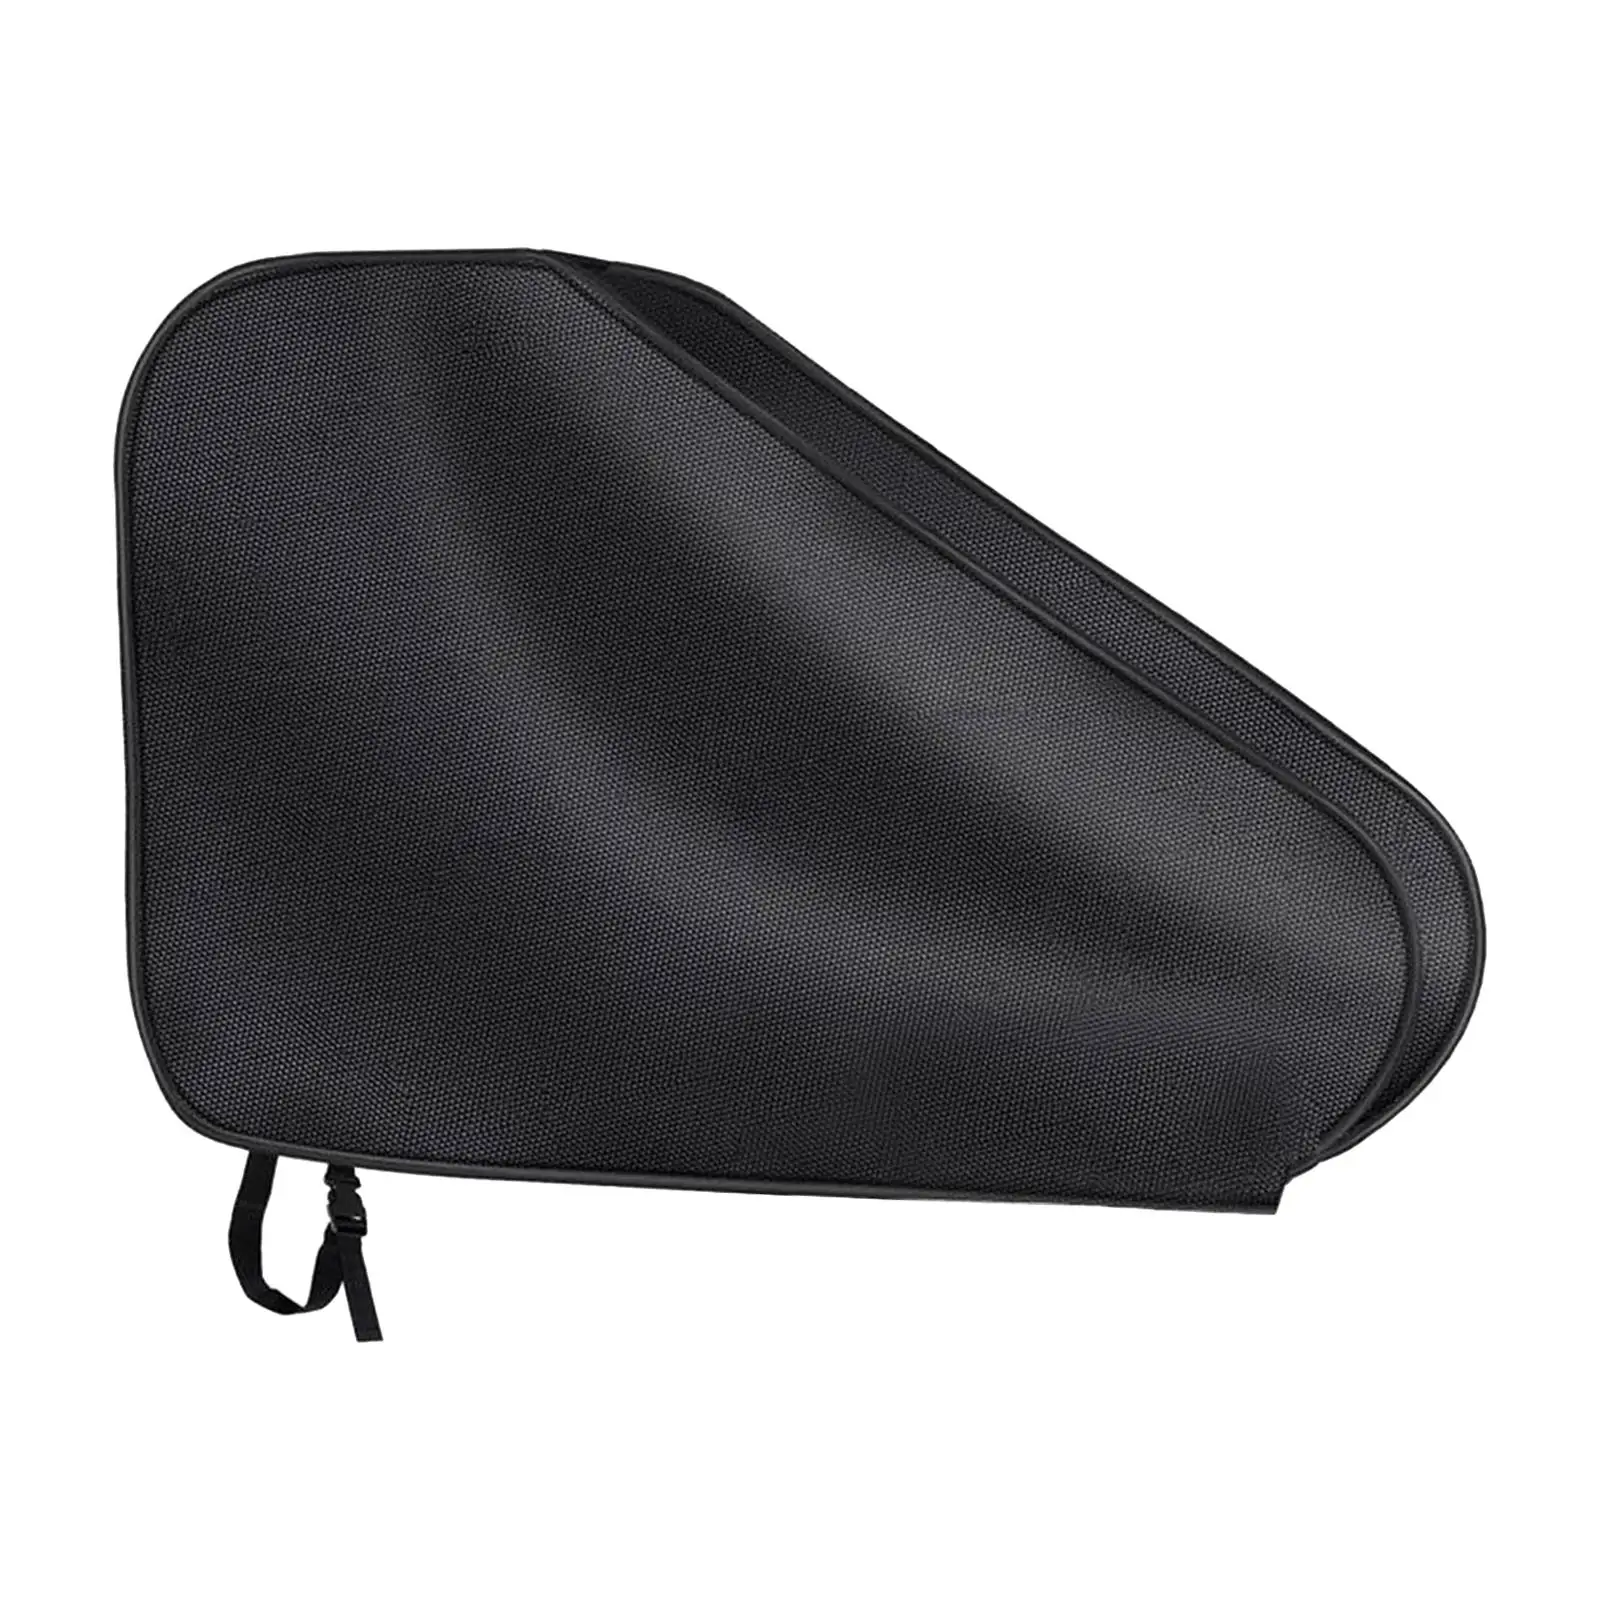 Caravan Hitch Cover 600D Oxford Cloth Breathable Universal Tongue Jack Cover